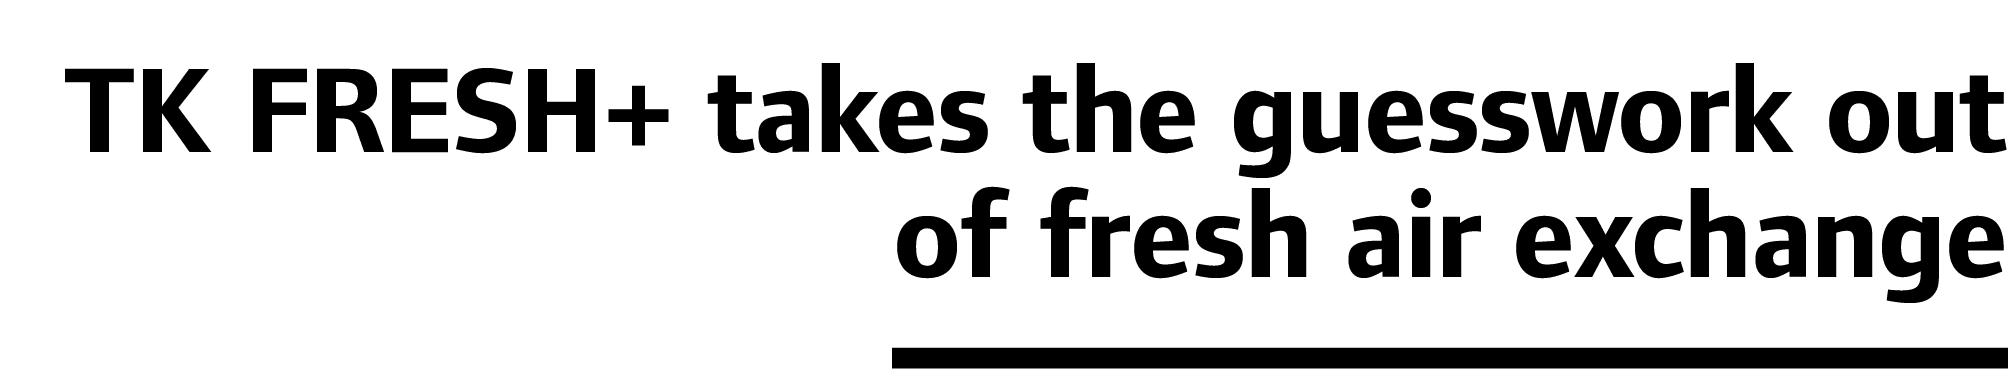 TK FRESH+ takes the guesswork out of fresh air exchange